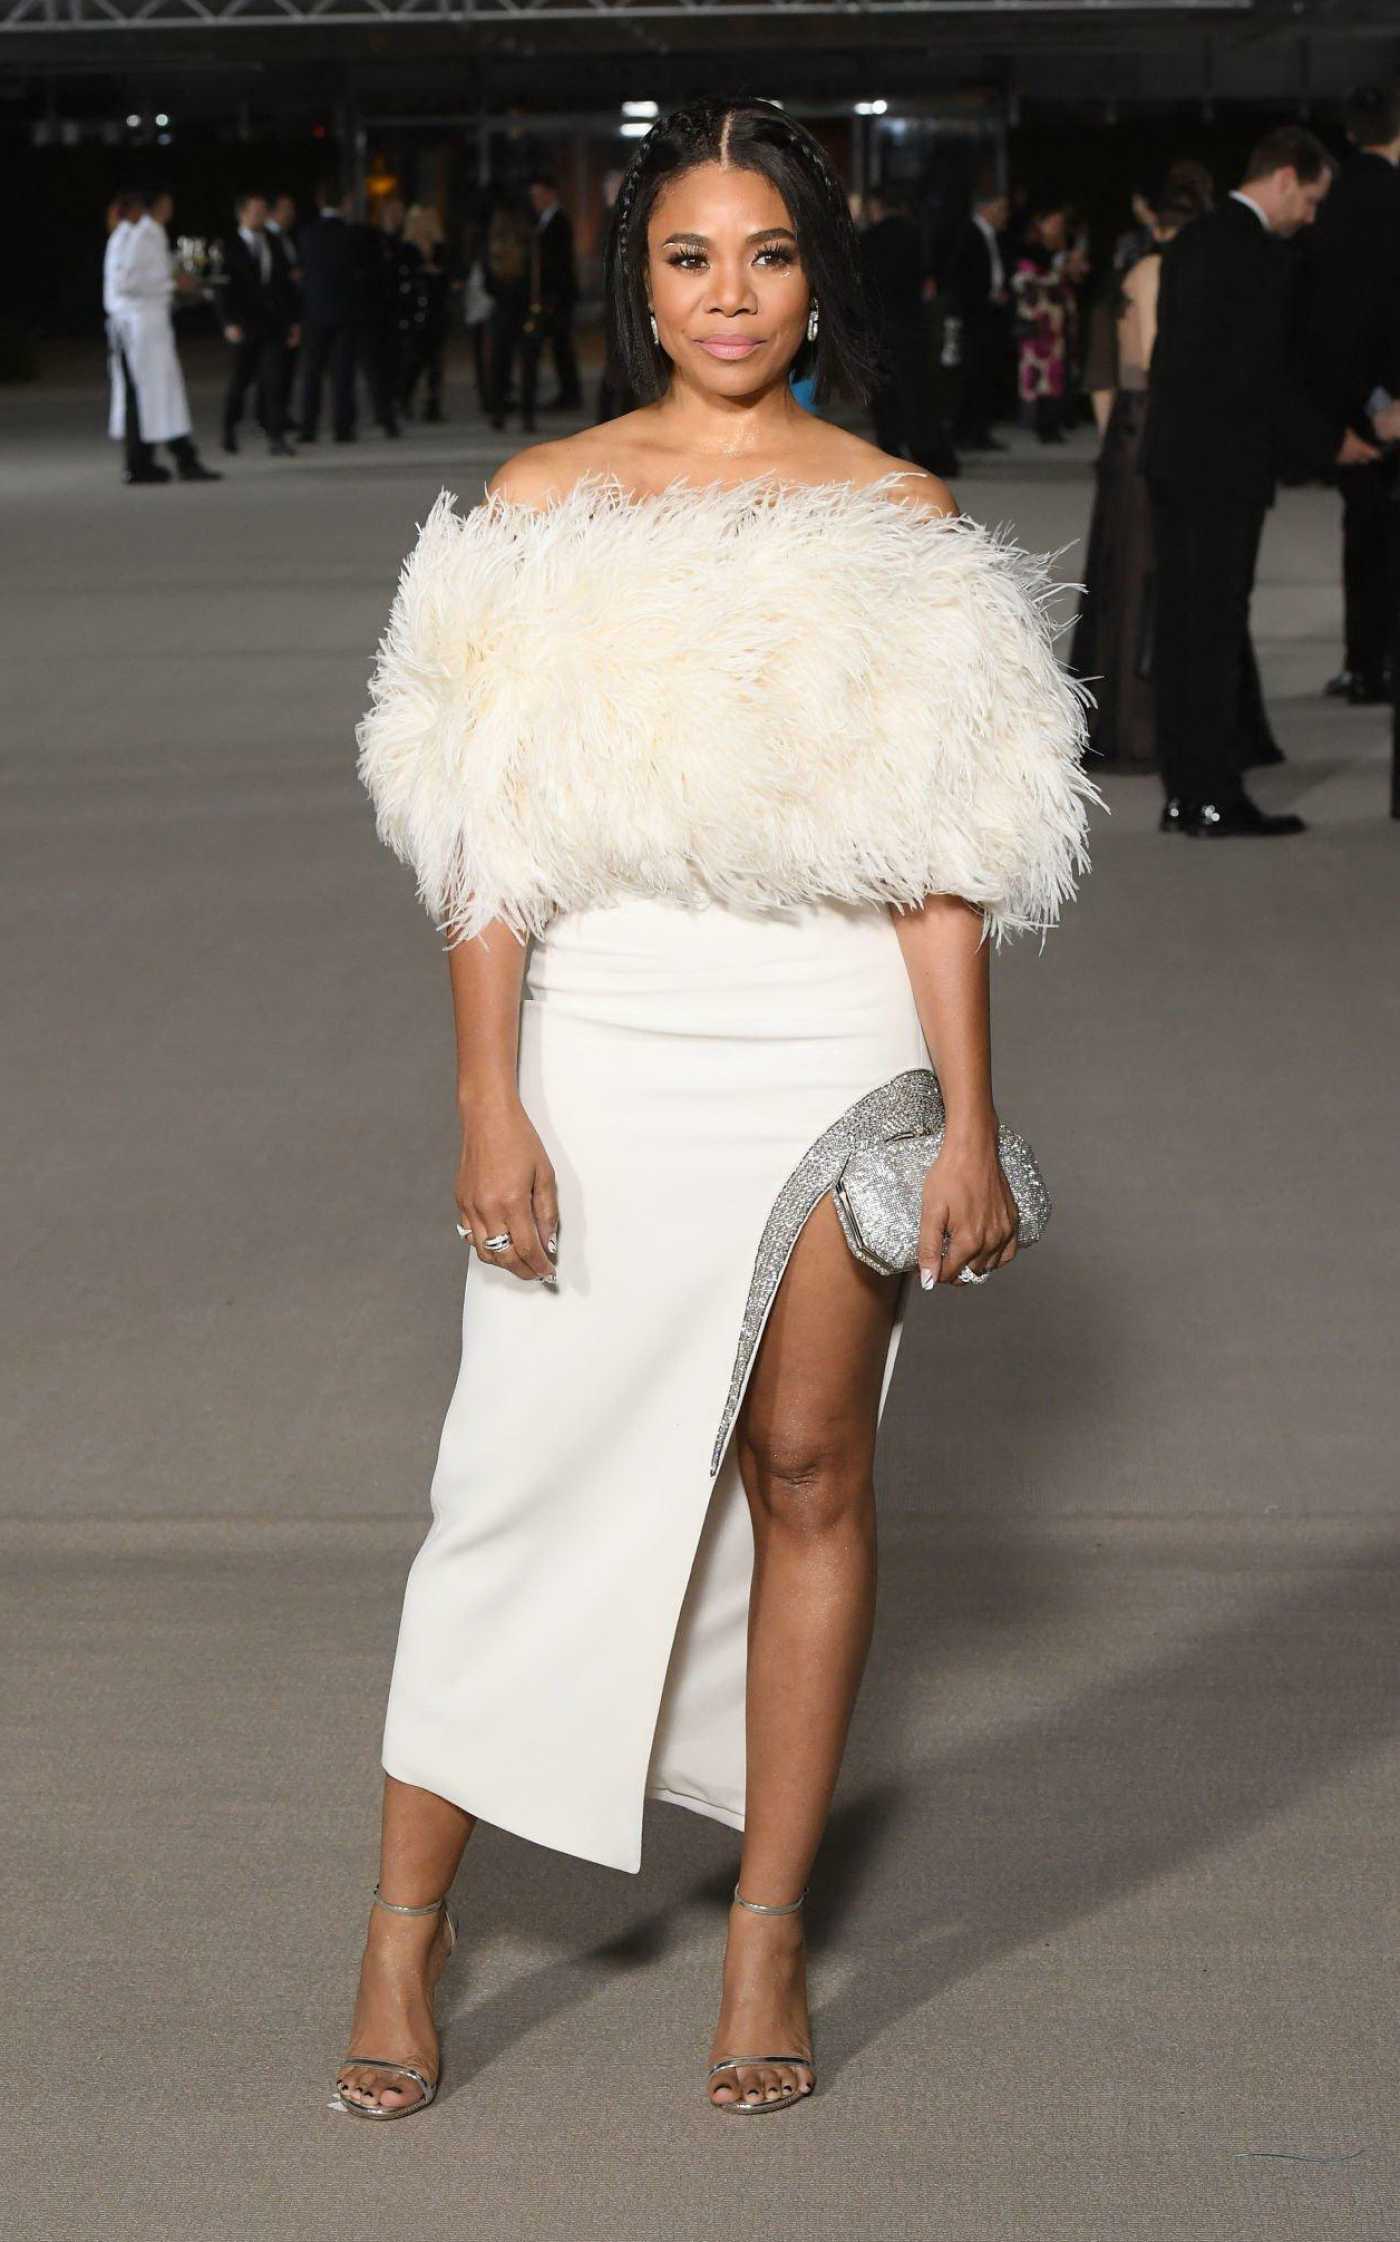 Regina Hall Attends the 2nd Annual Academy Museum Gala in Los Angeles 10/15/2022